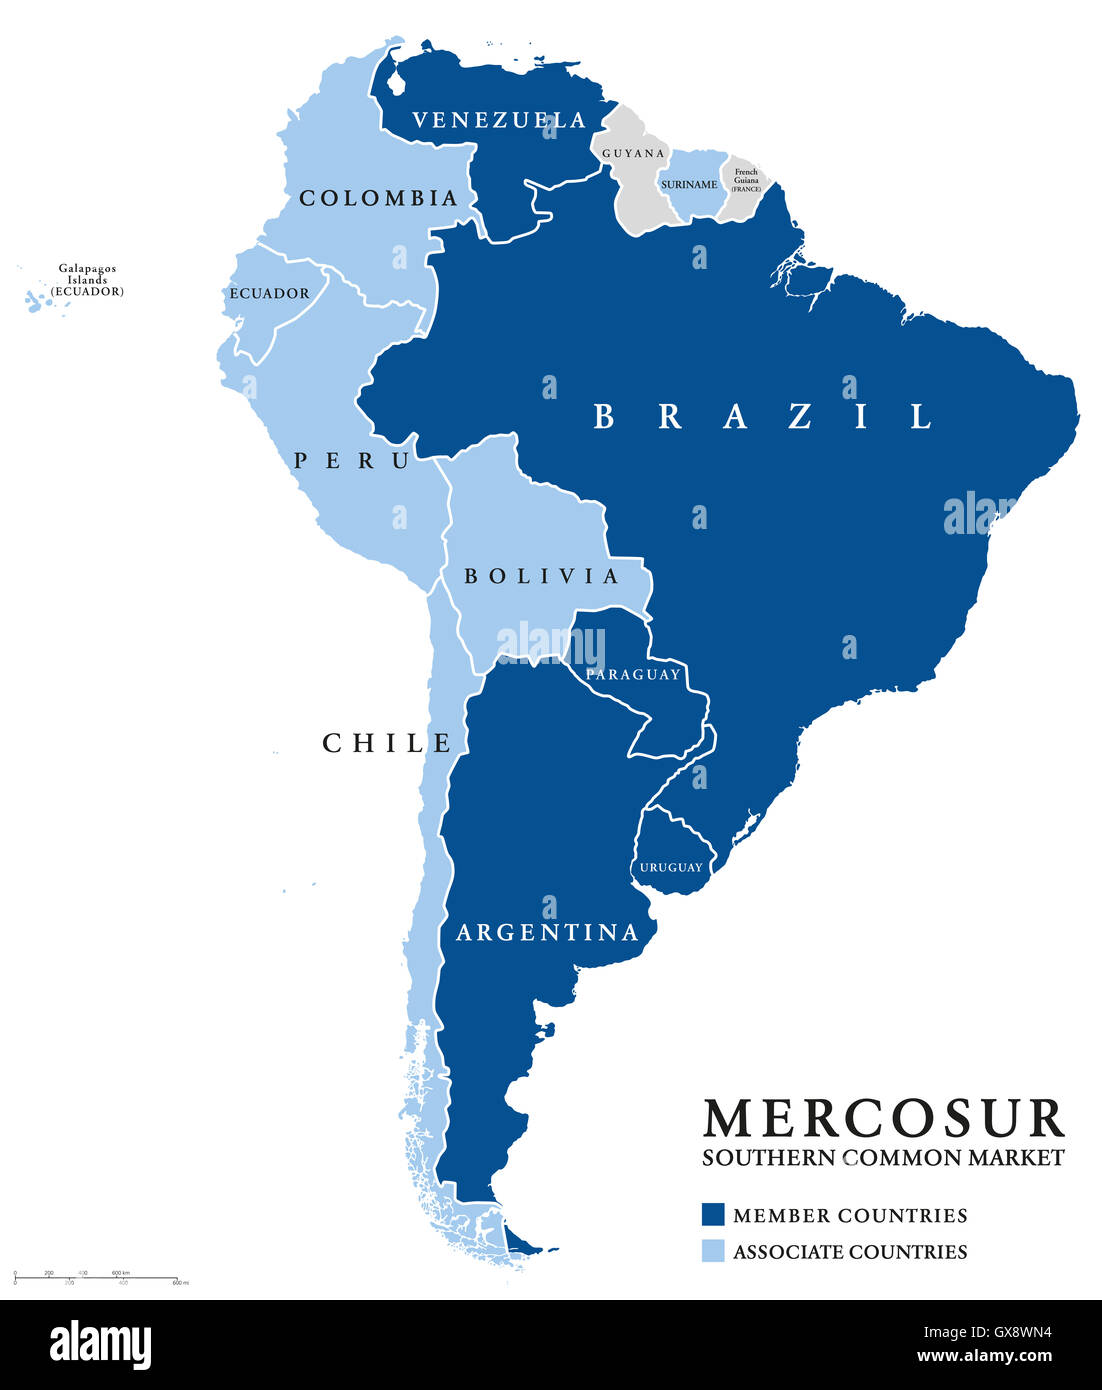 MERCOSUR Southern Common Market countries info map, also Mercosul. Free trade bloc. Stock Photo